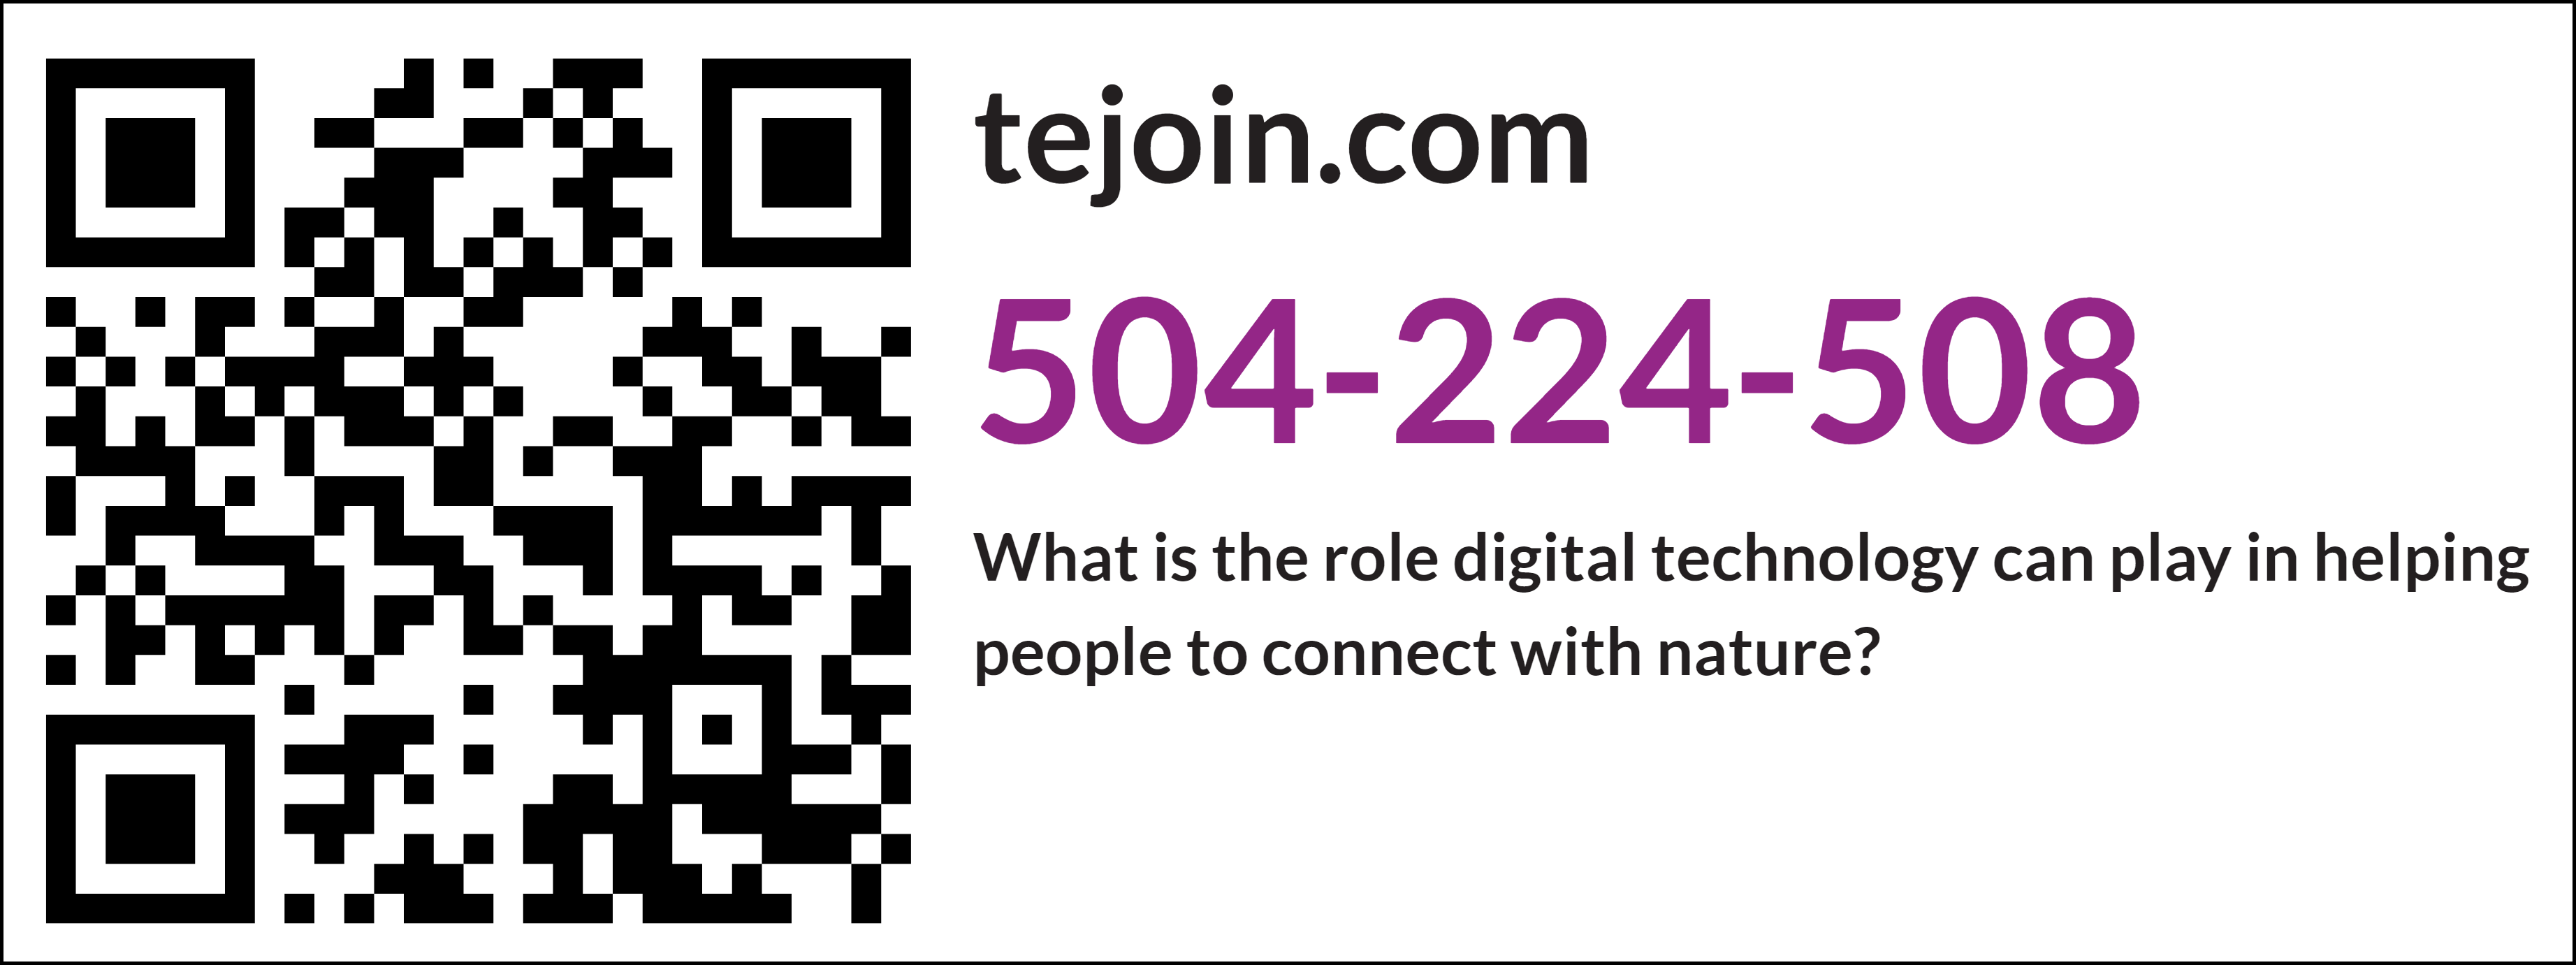 tejoin.com 504-224-508 what is the role digital technology can play in helping connect people to nature